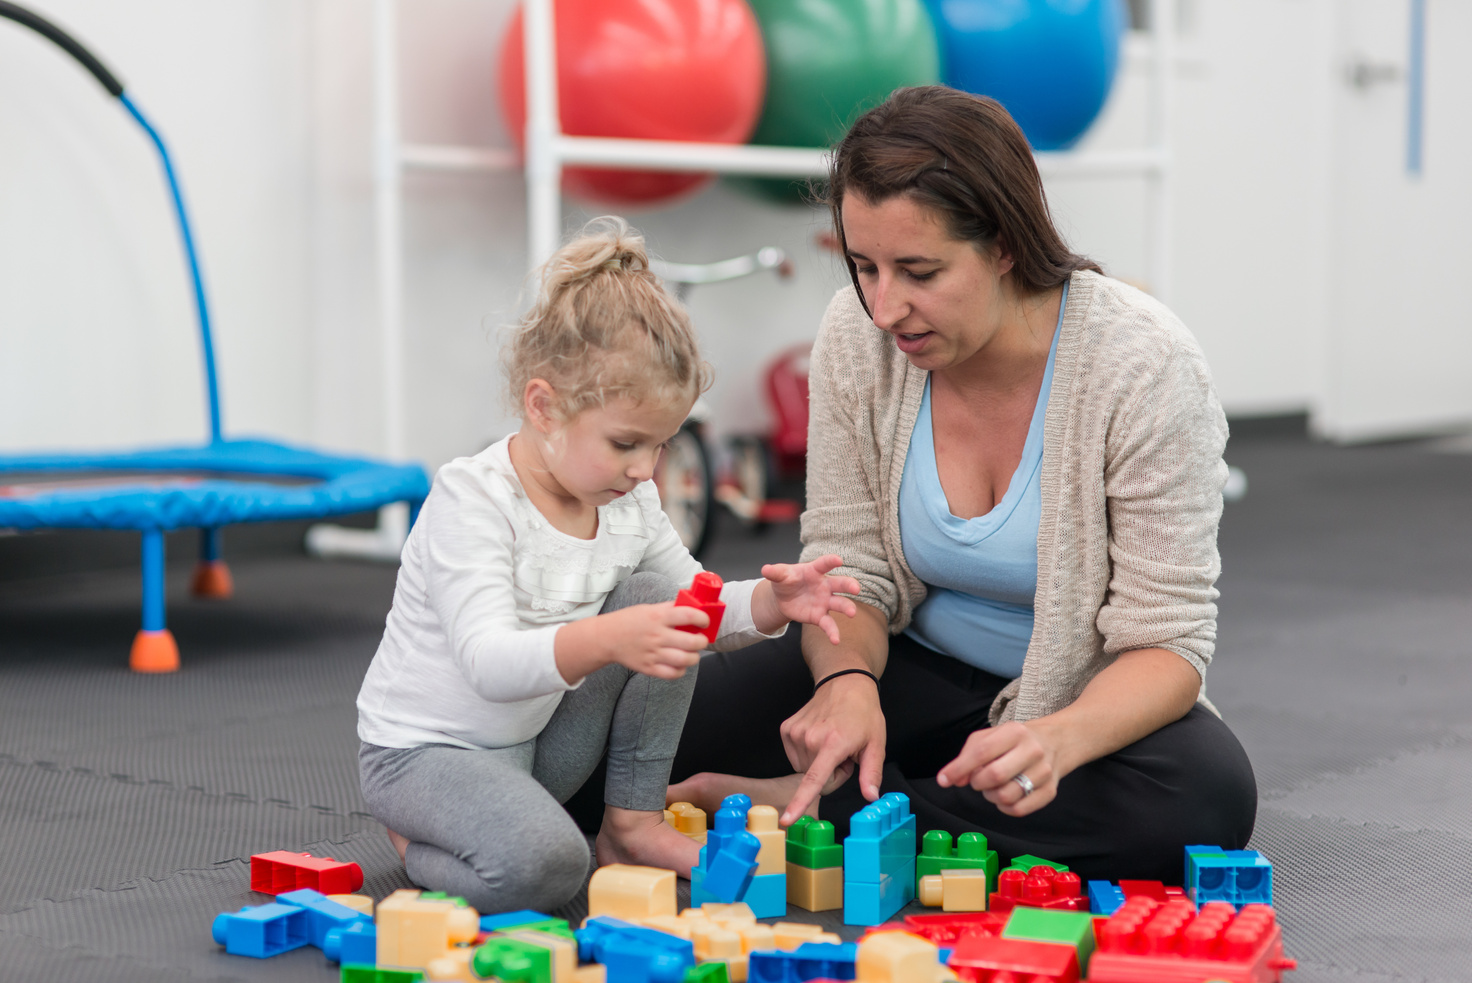 Occupational Therapist works with a young girl doing play therapy